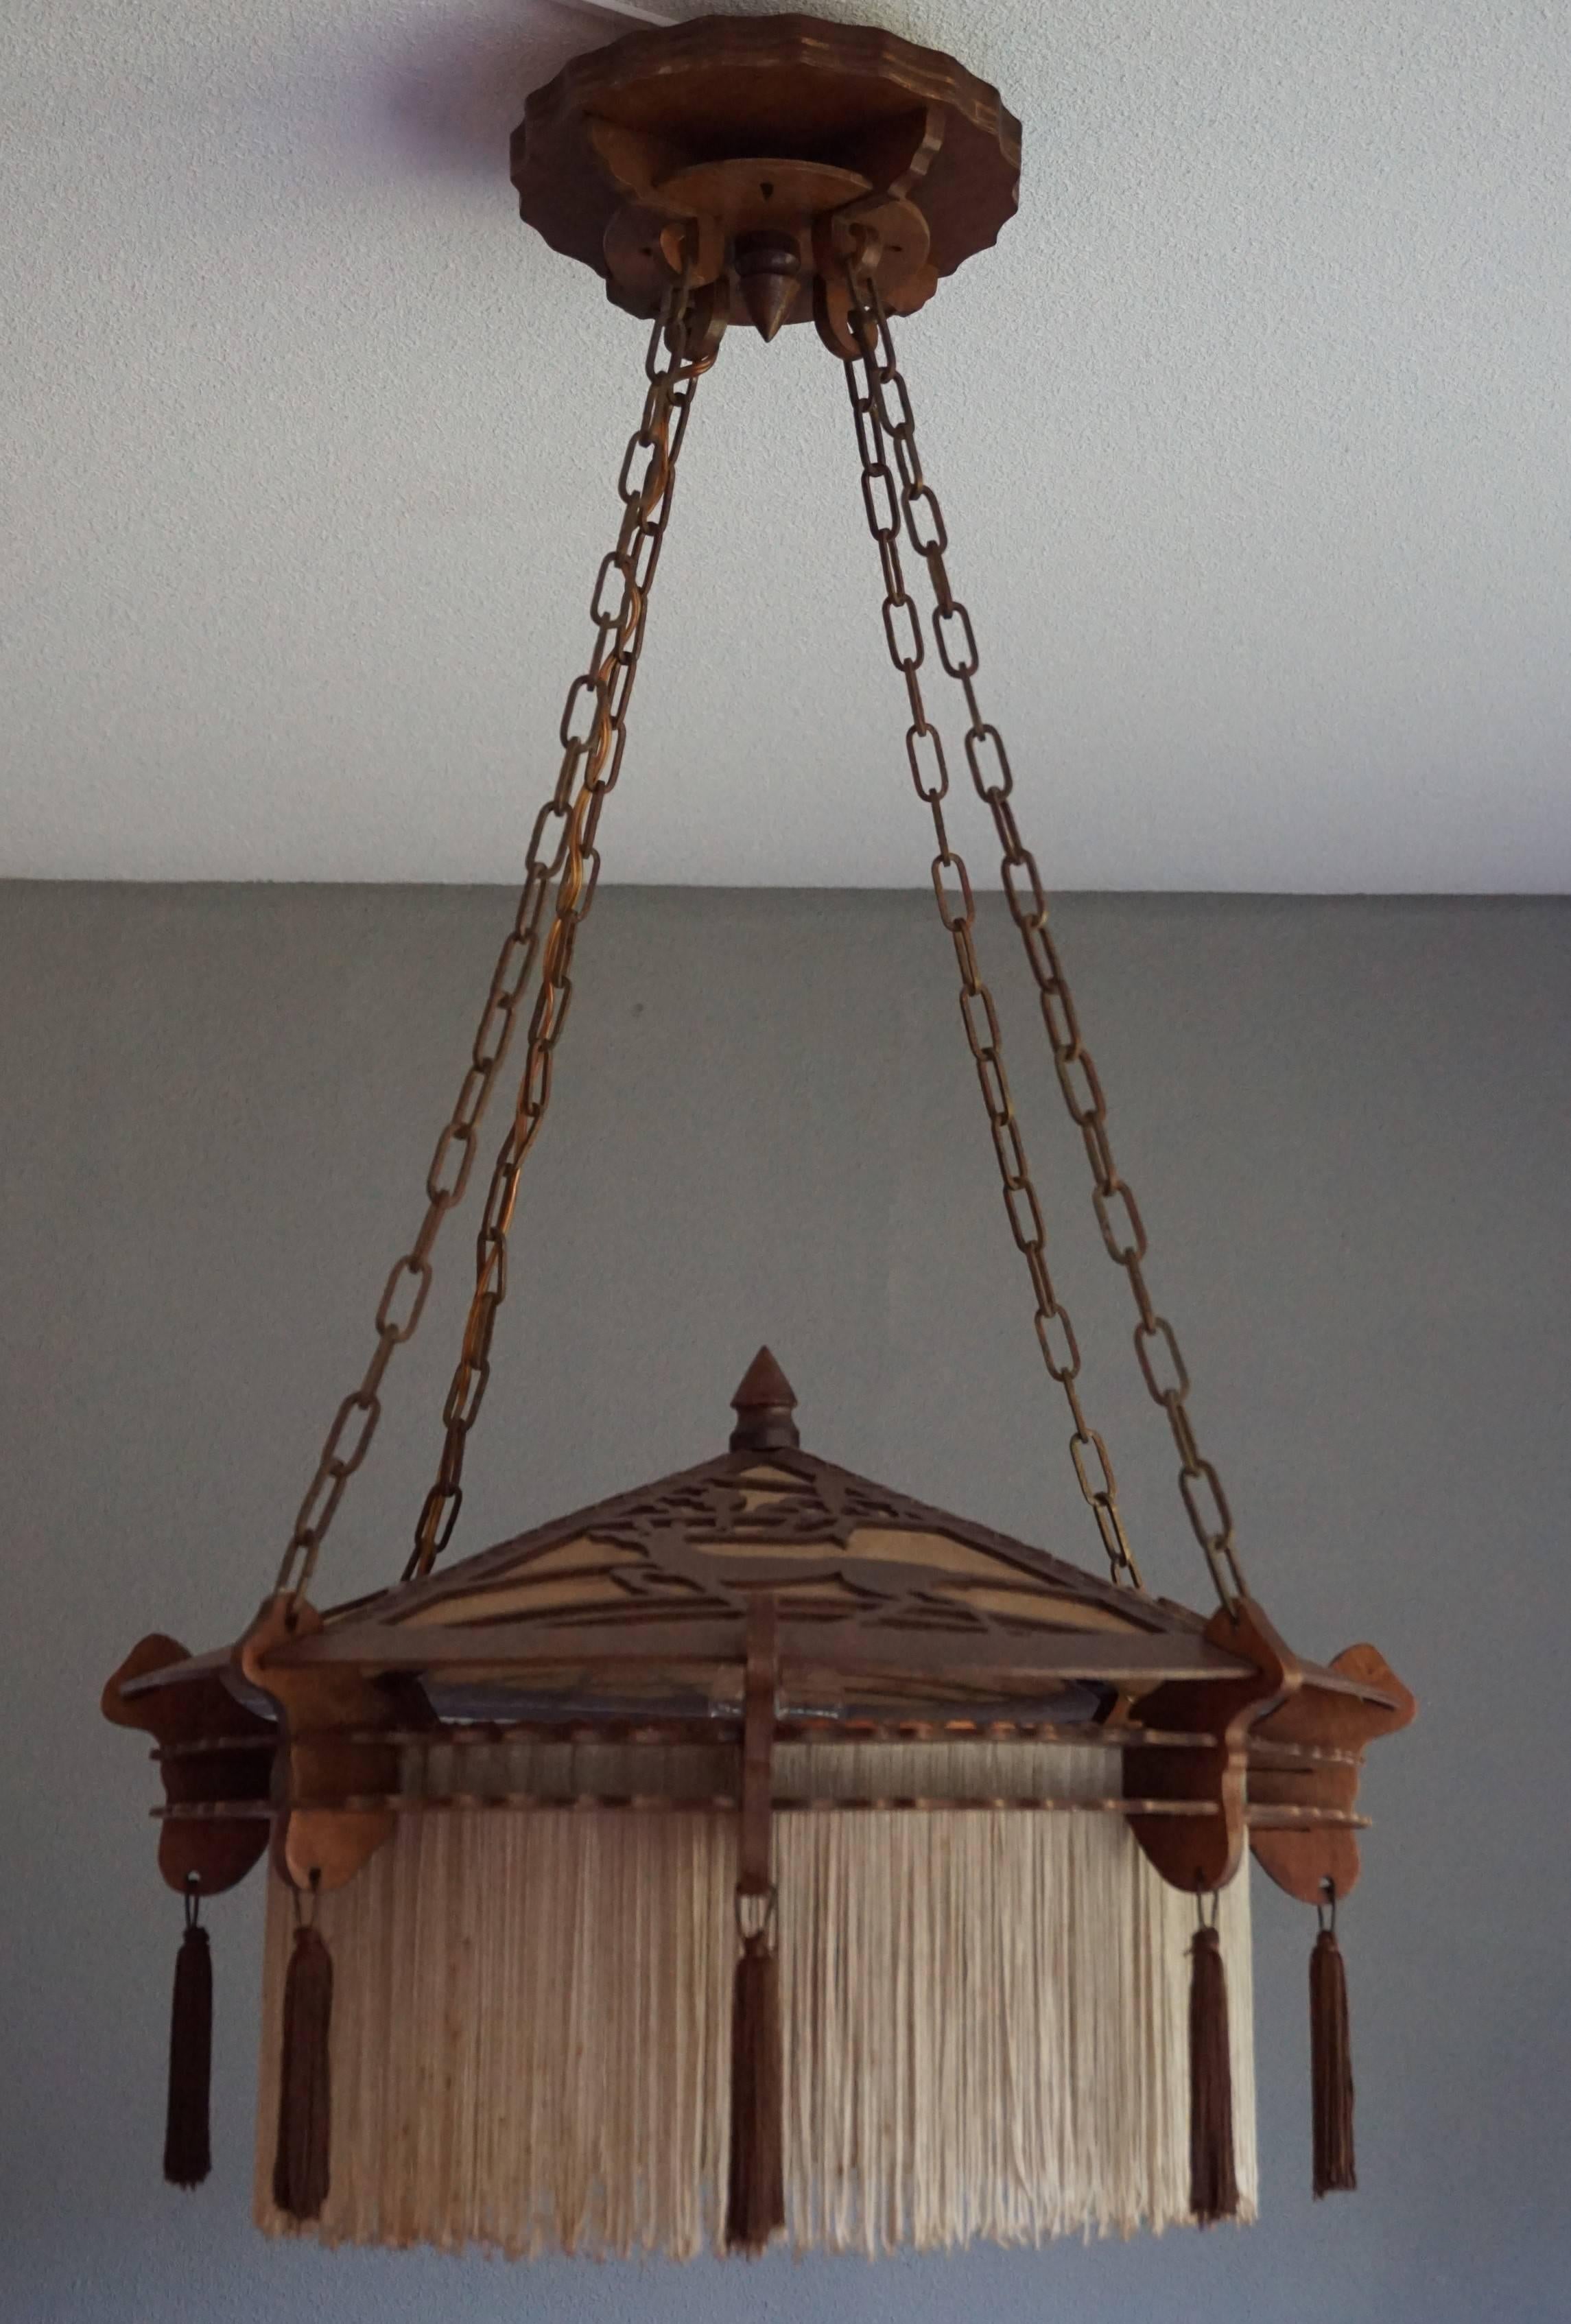 Early 20th Century Arts & Crafts Handsawn Wooden Pendant with Tassels & Fringes 11